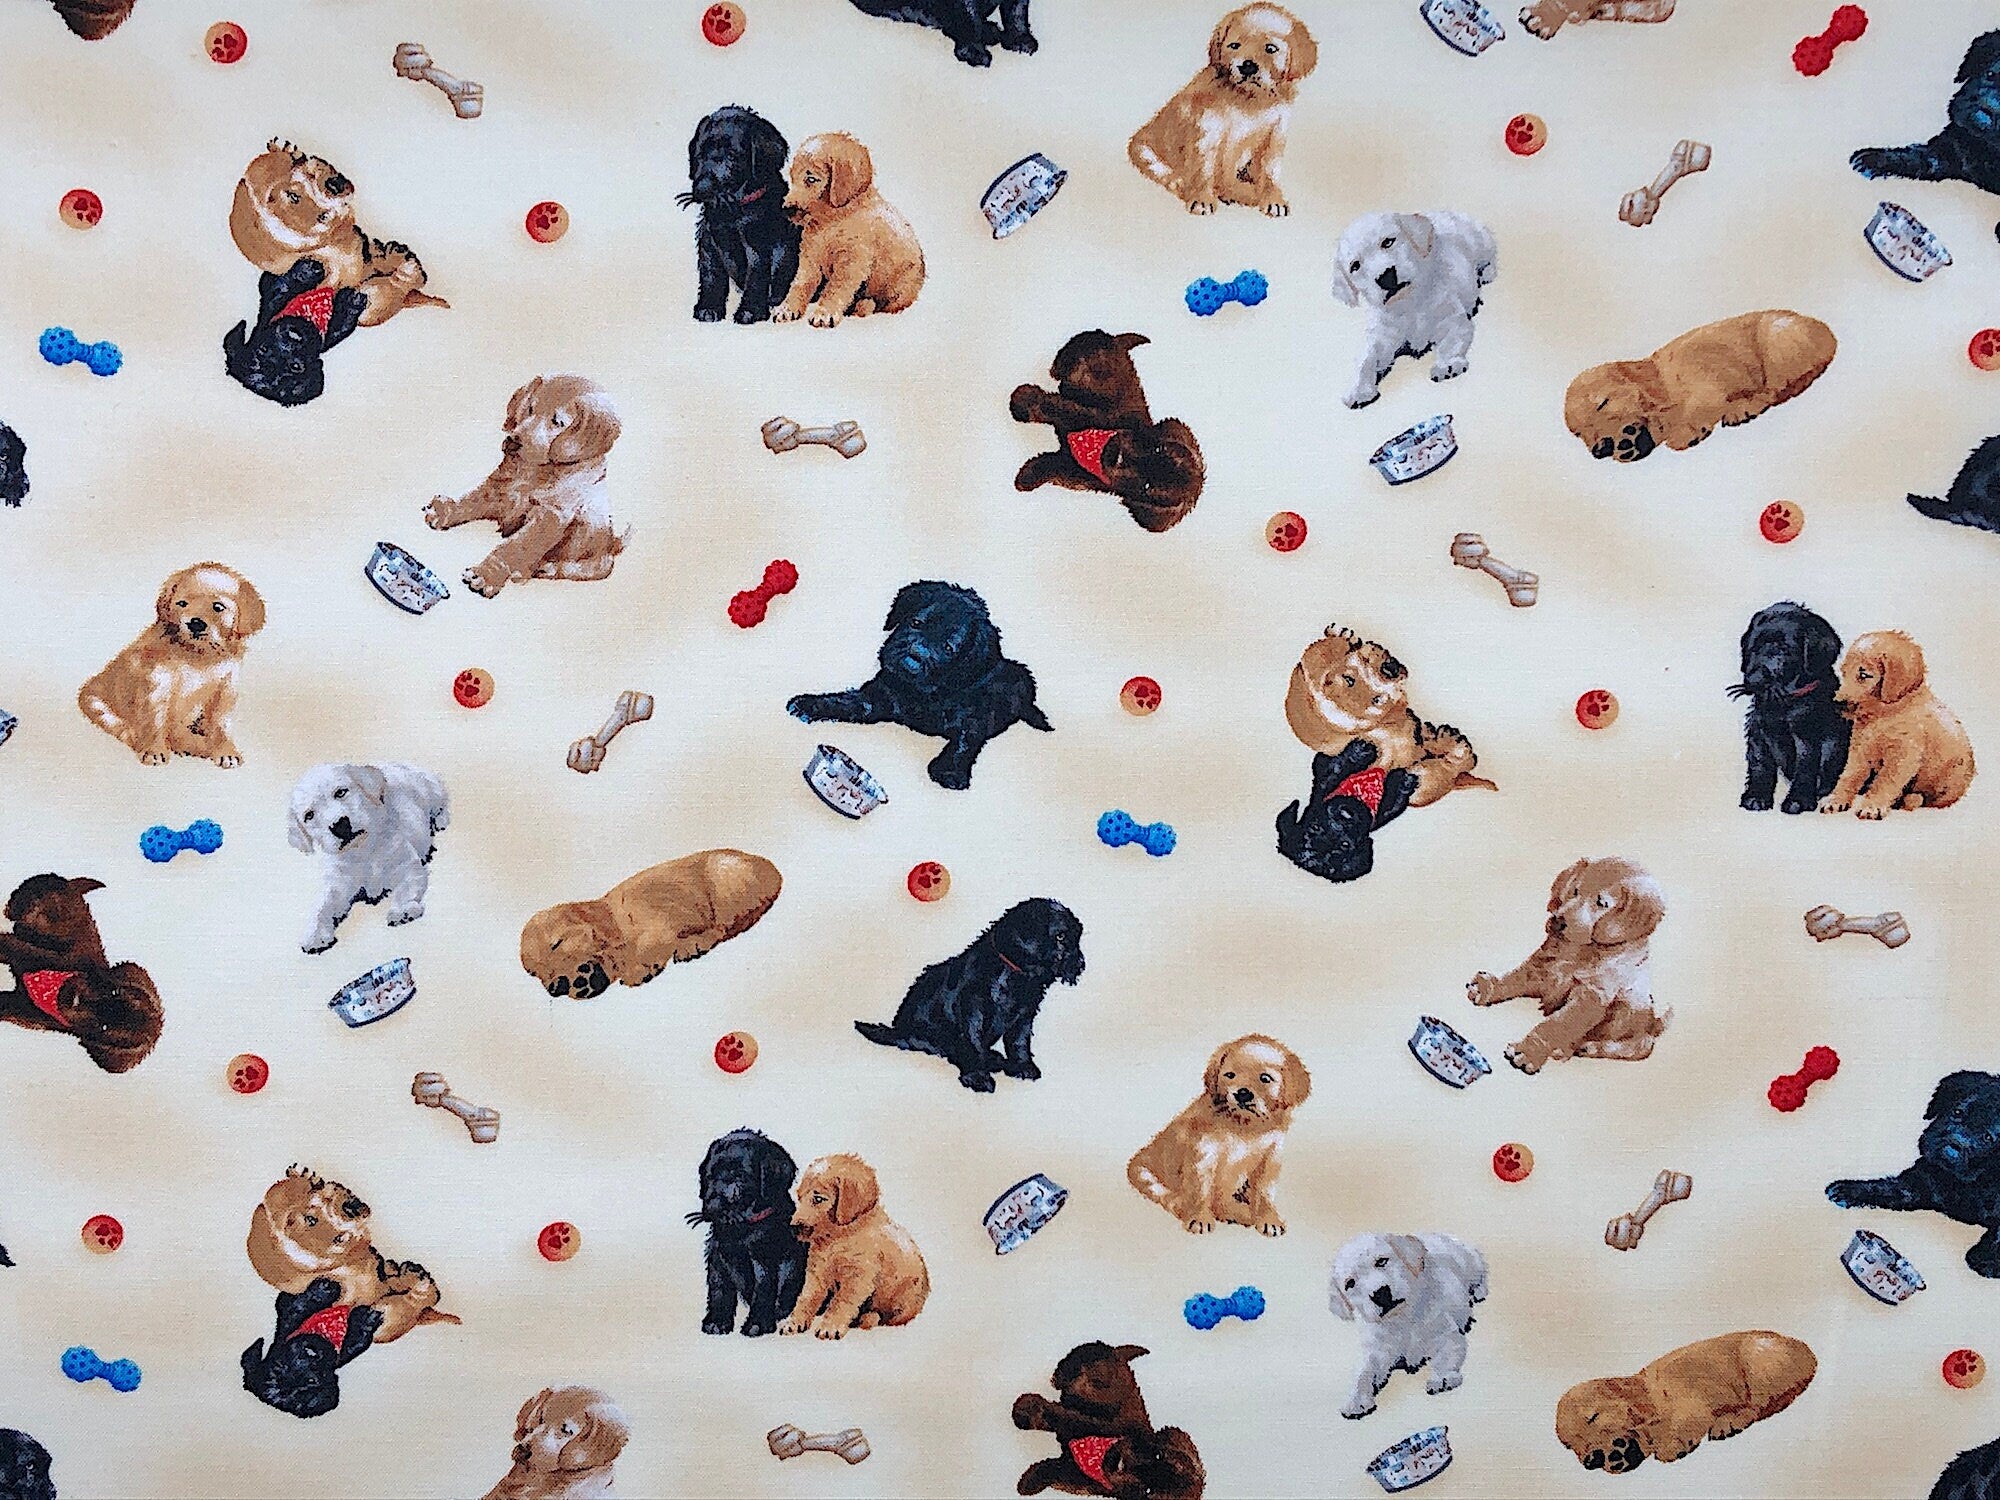 This fabric is covered with black, white and beige puppies. The background is a mix of cream and beige.